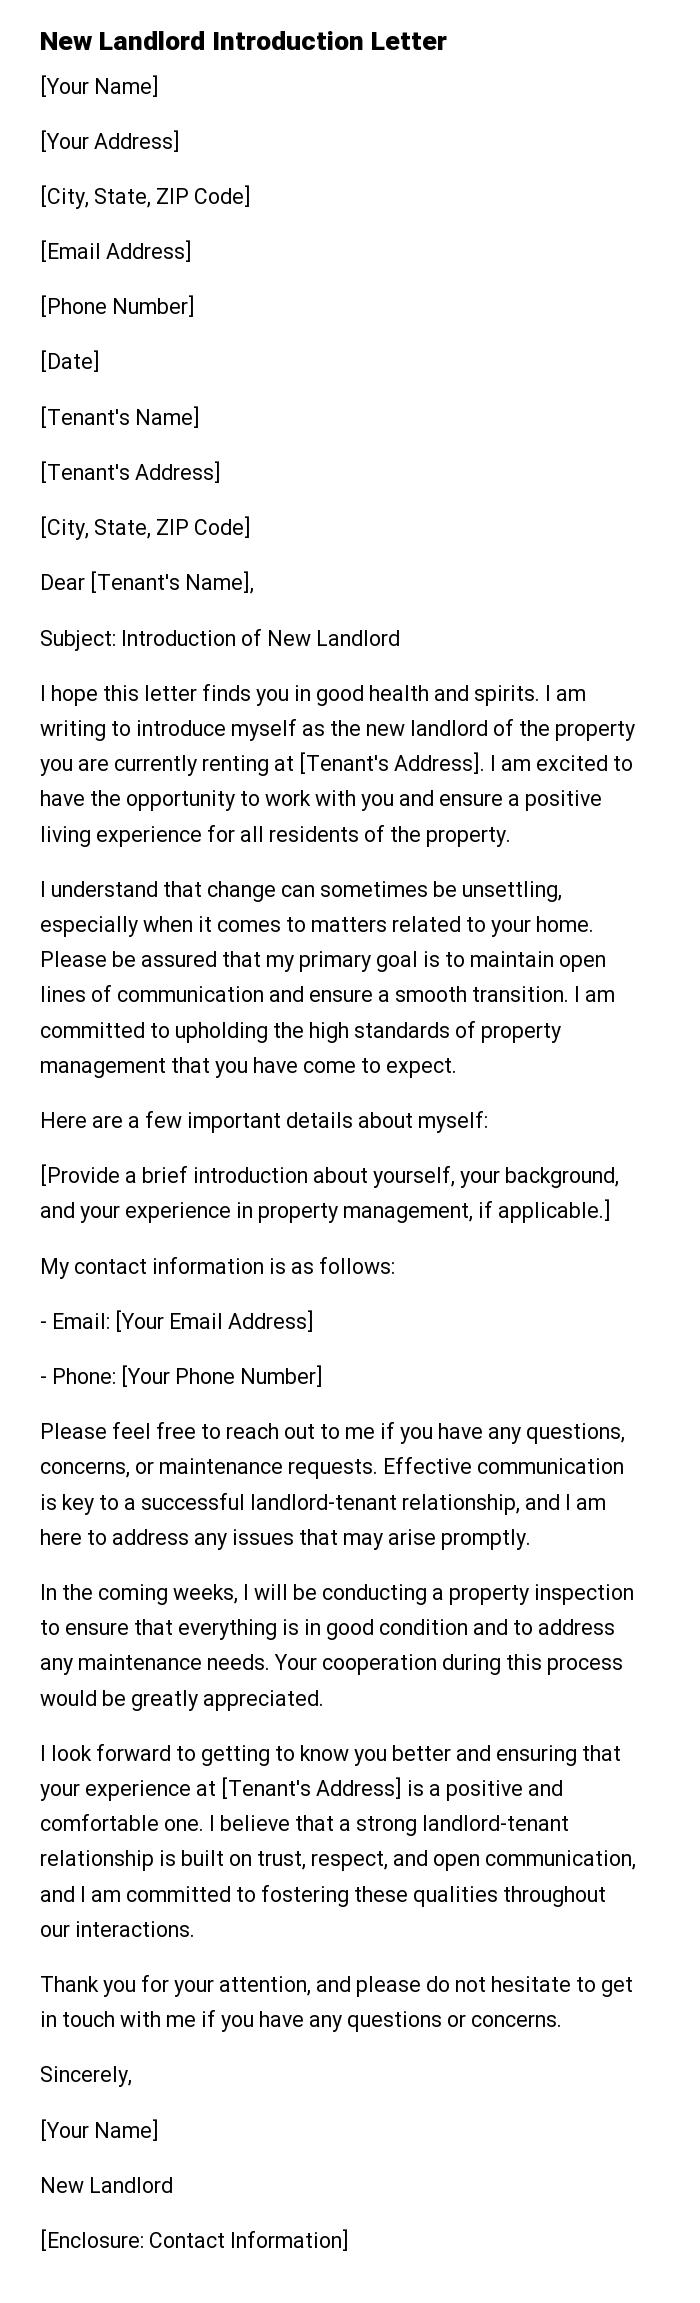 New Landlord Introduction Letter